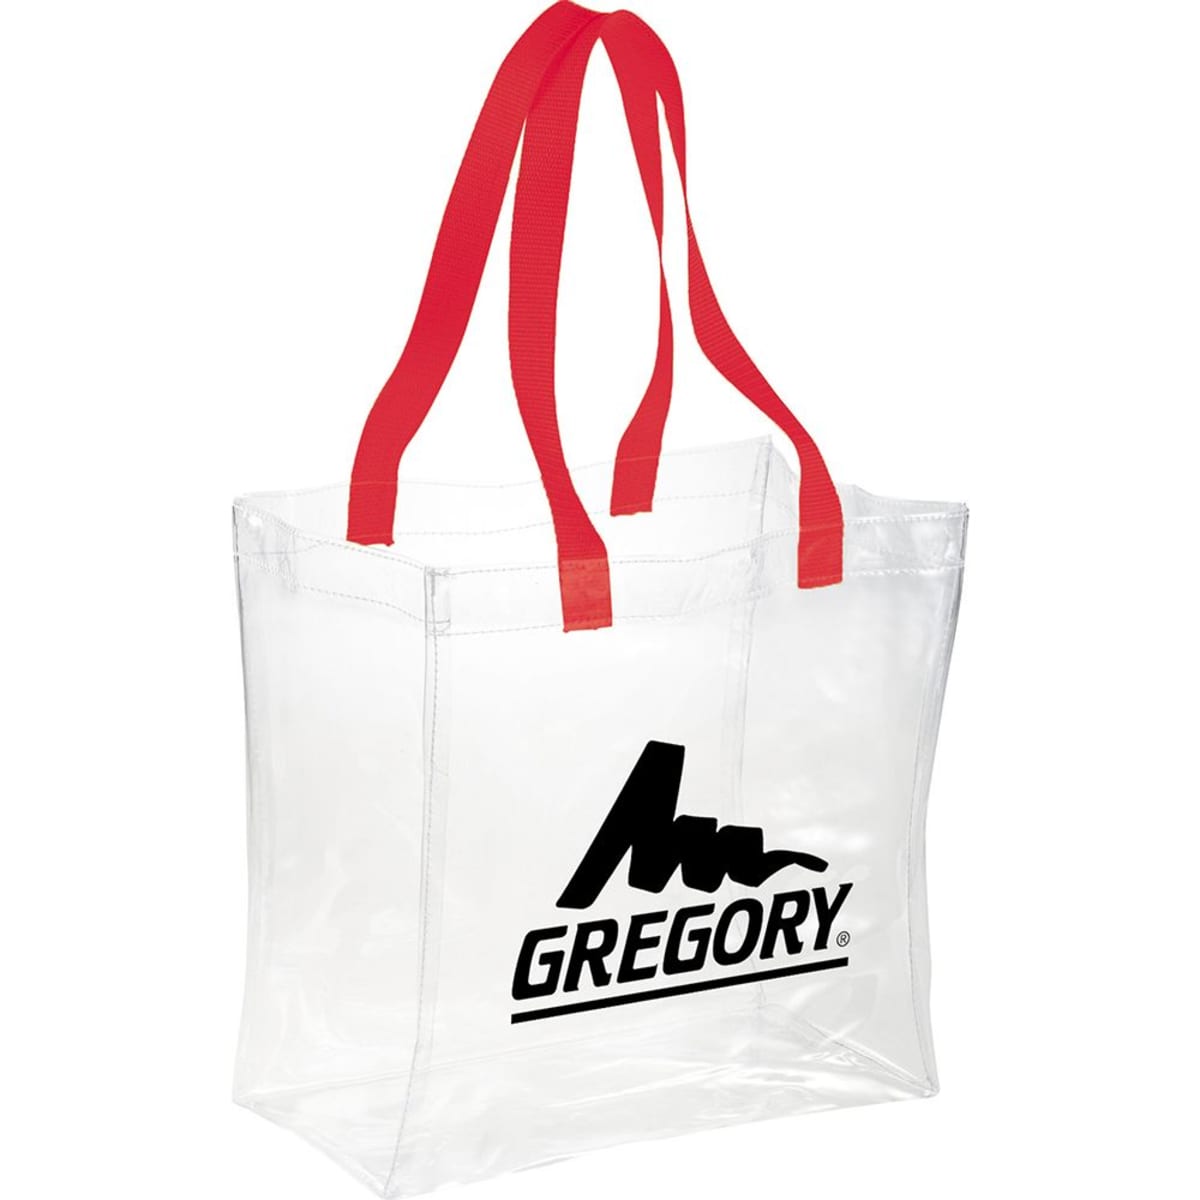 Rally Clear Stadium Tote 15L